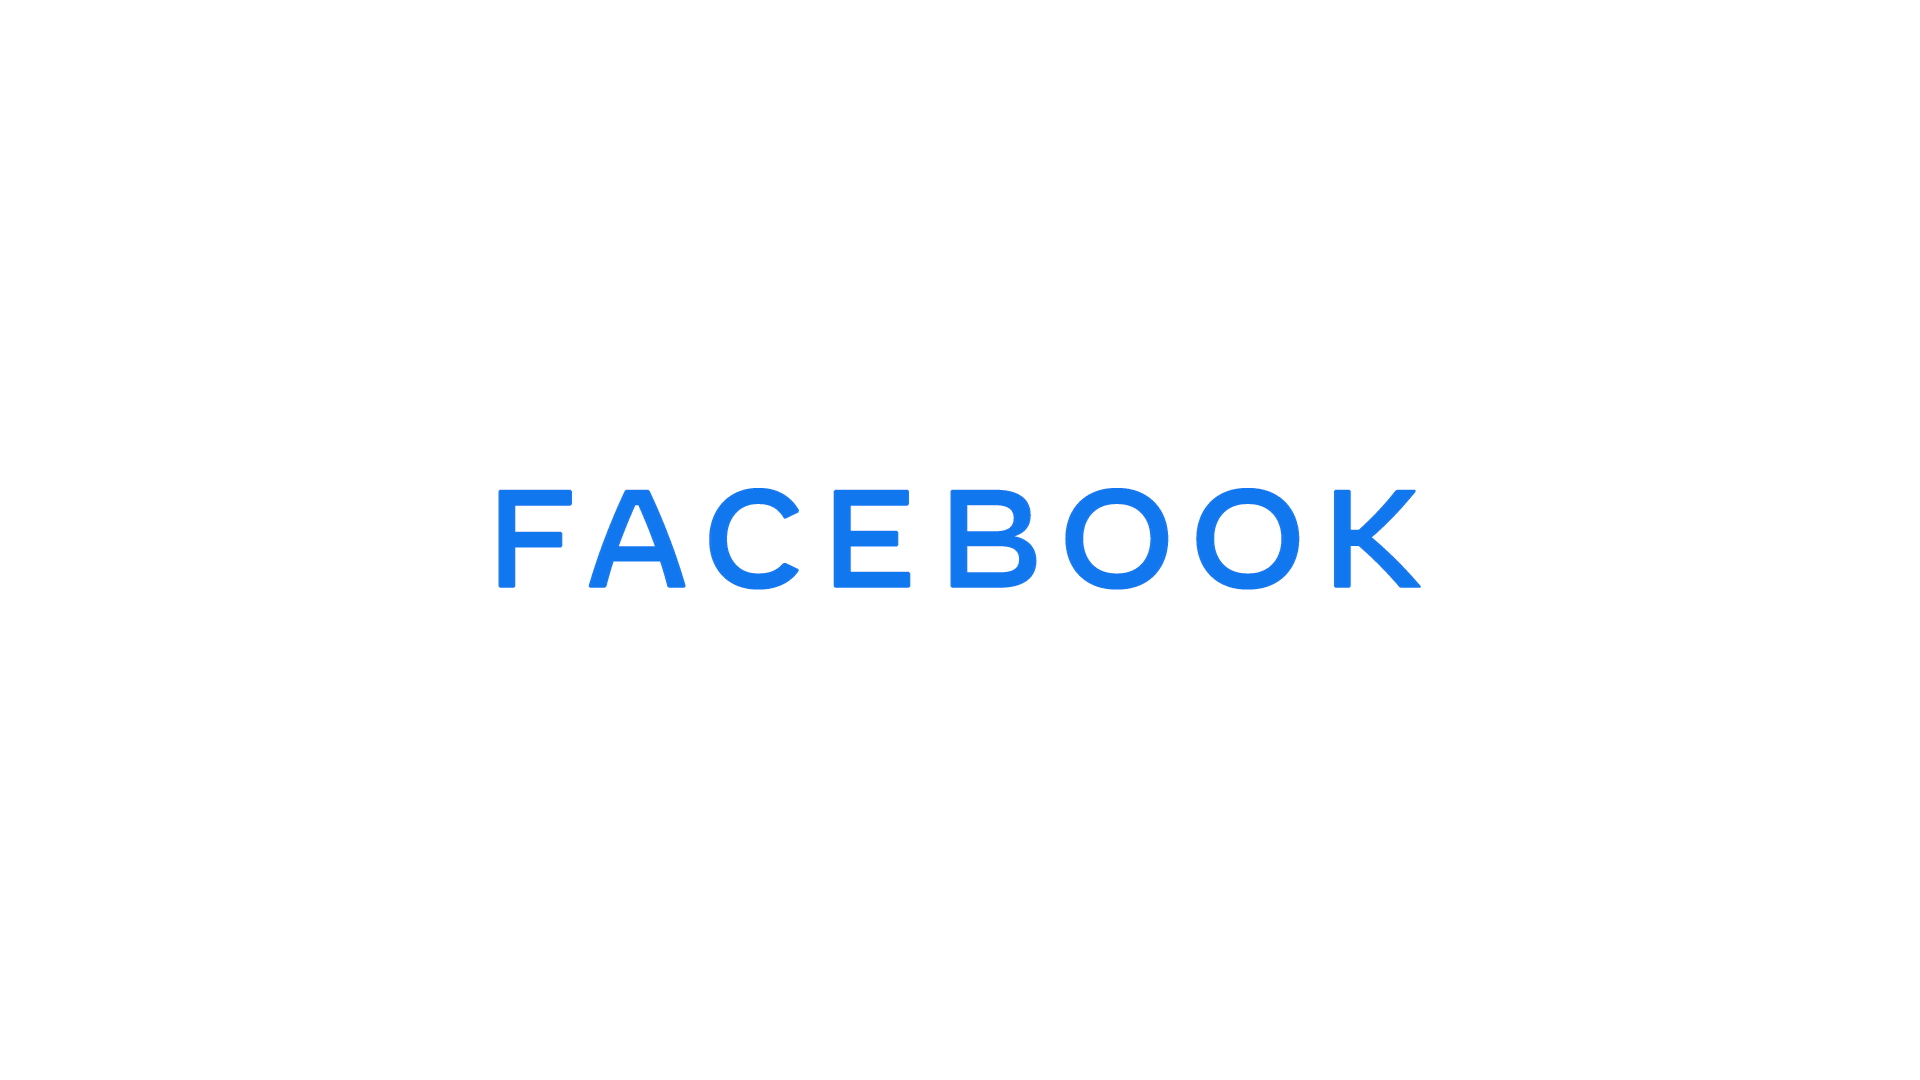 Facebook Unveils New Logo With Unique Branding for All of its Products